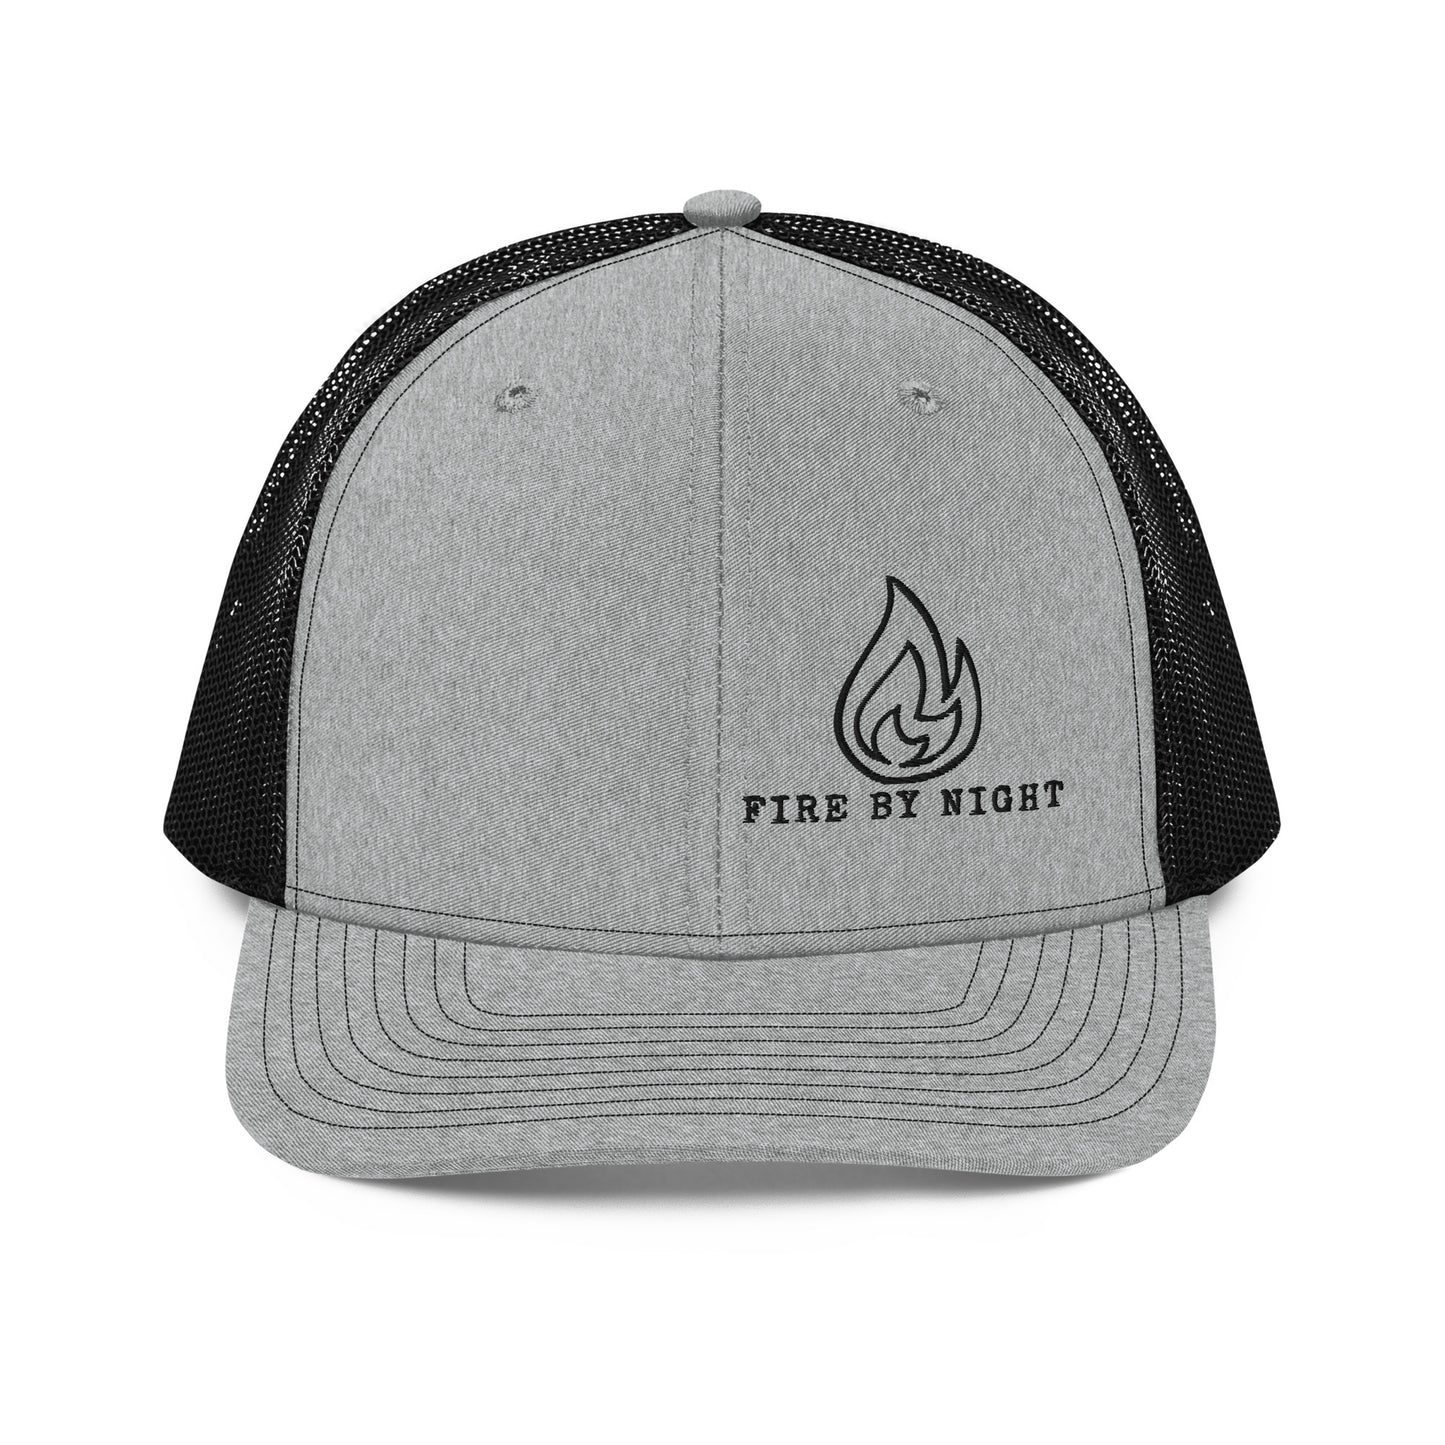 Richardson 112 Black Embroidered Logo - Fire By Night